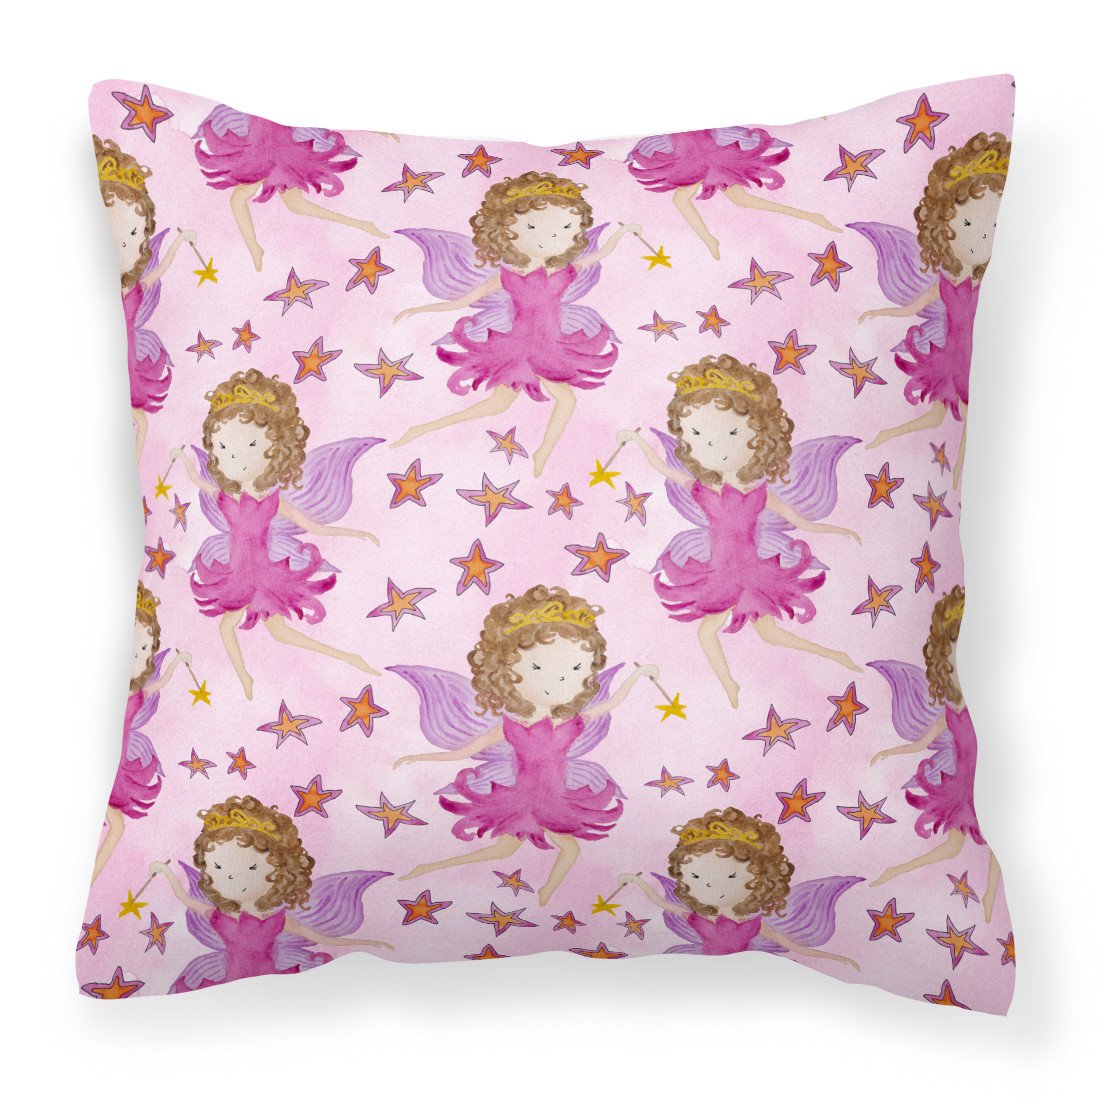 Watercolor Fairy Princess on Pink Fabric Decorative Pillow BB7547PW1818 by Caroline's Treasures